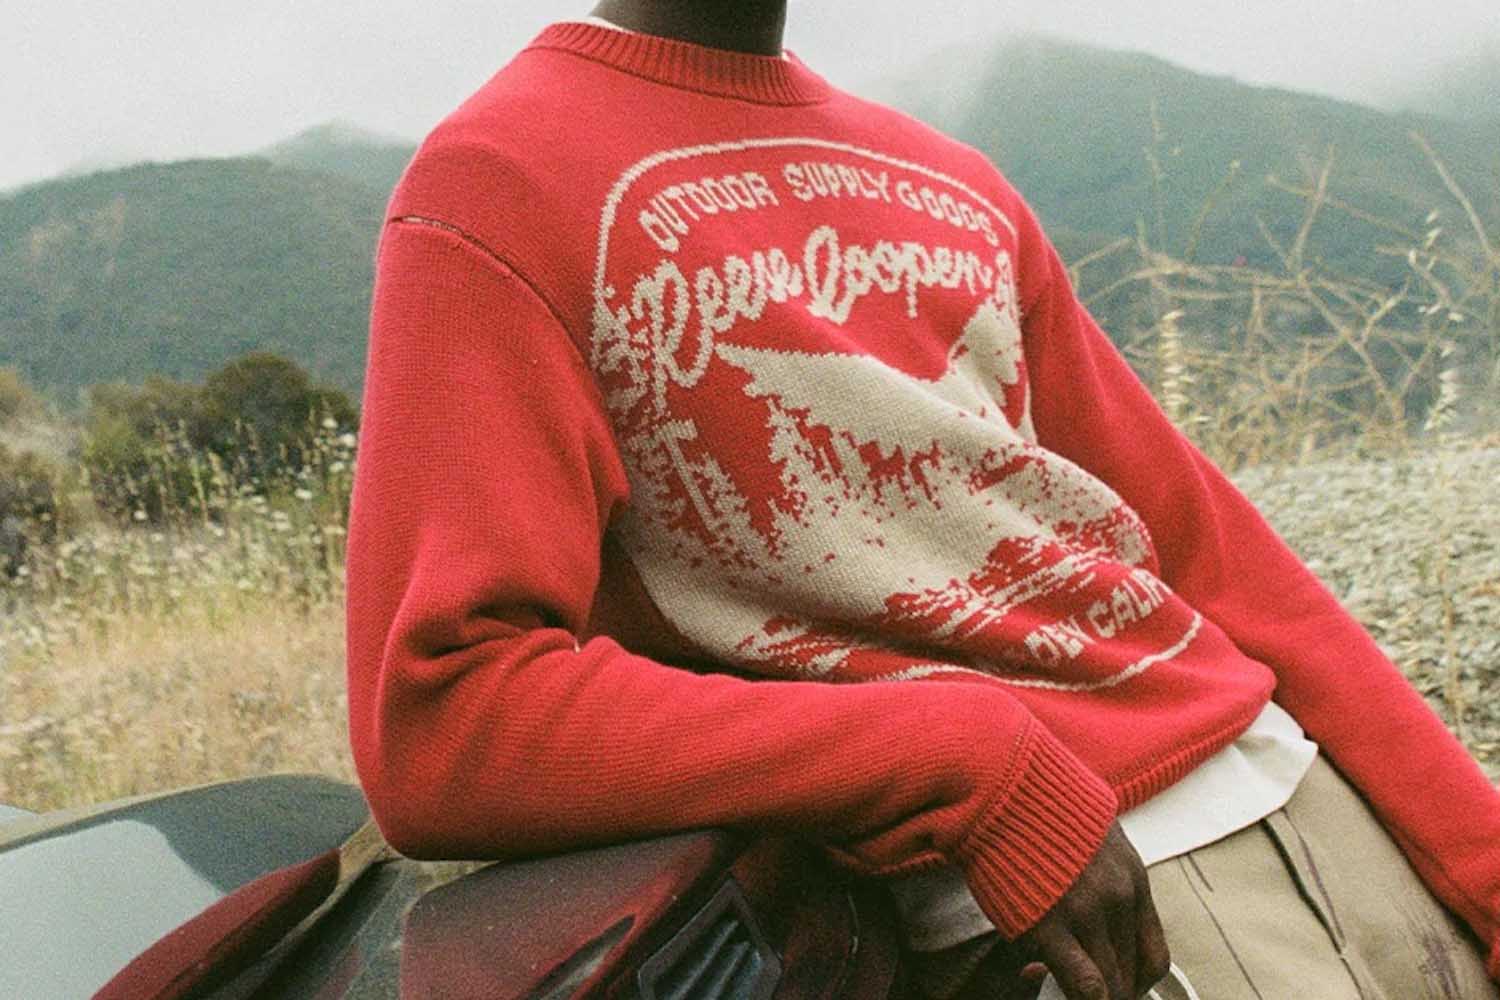 A model in a red knit Reese Cooper sweater against an outdoor backdrop